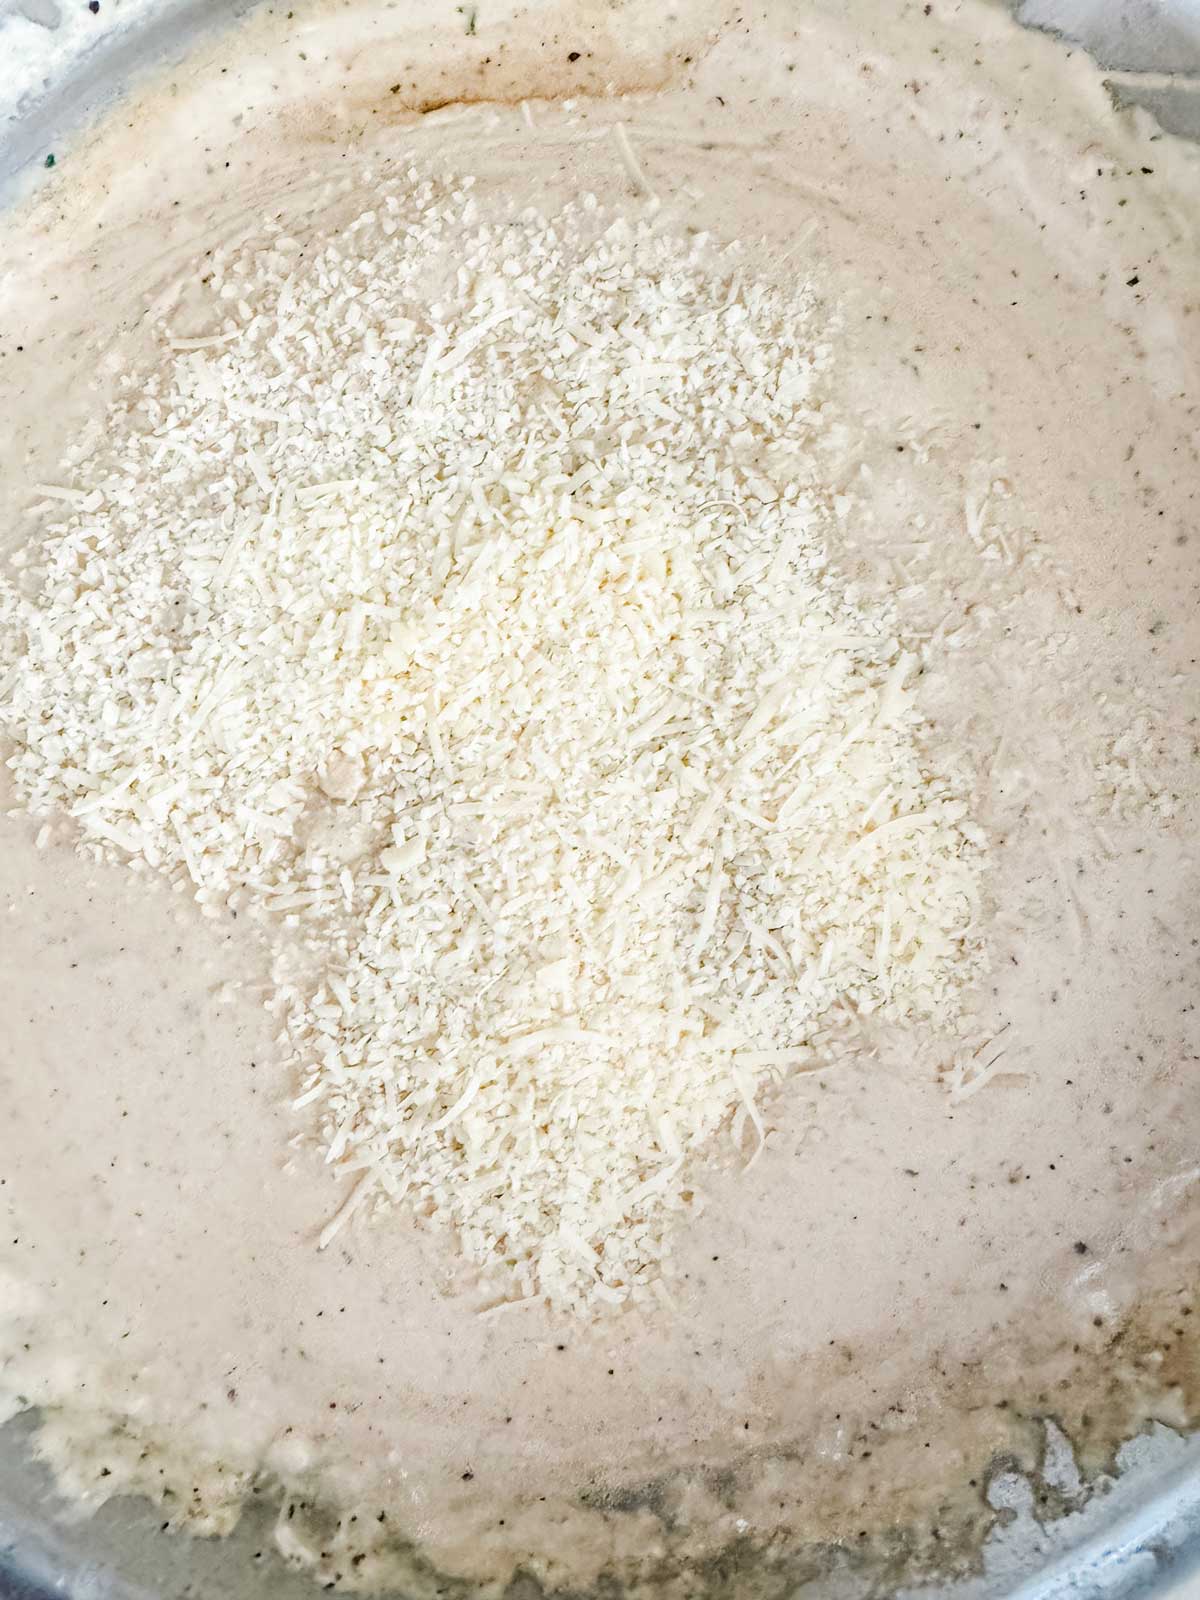 Parmesan cheese being added to a cream sauce.